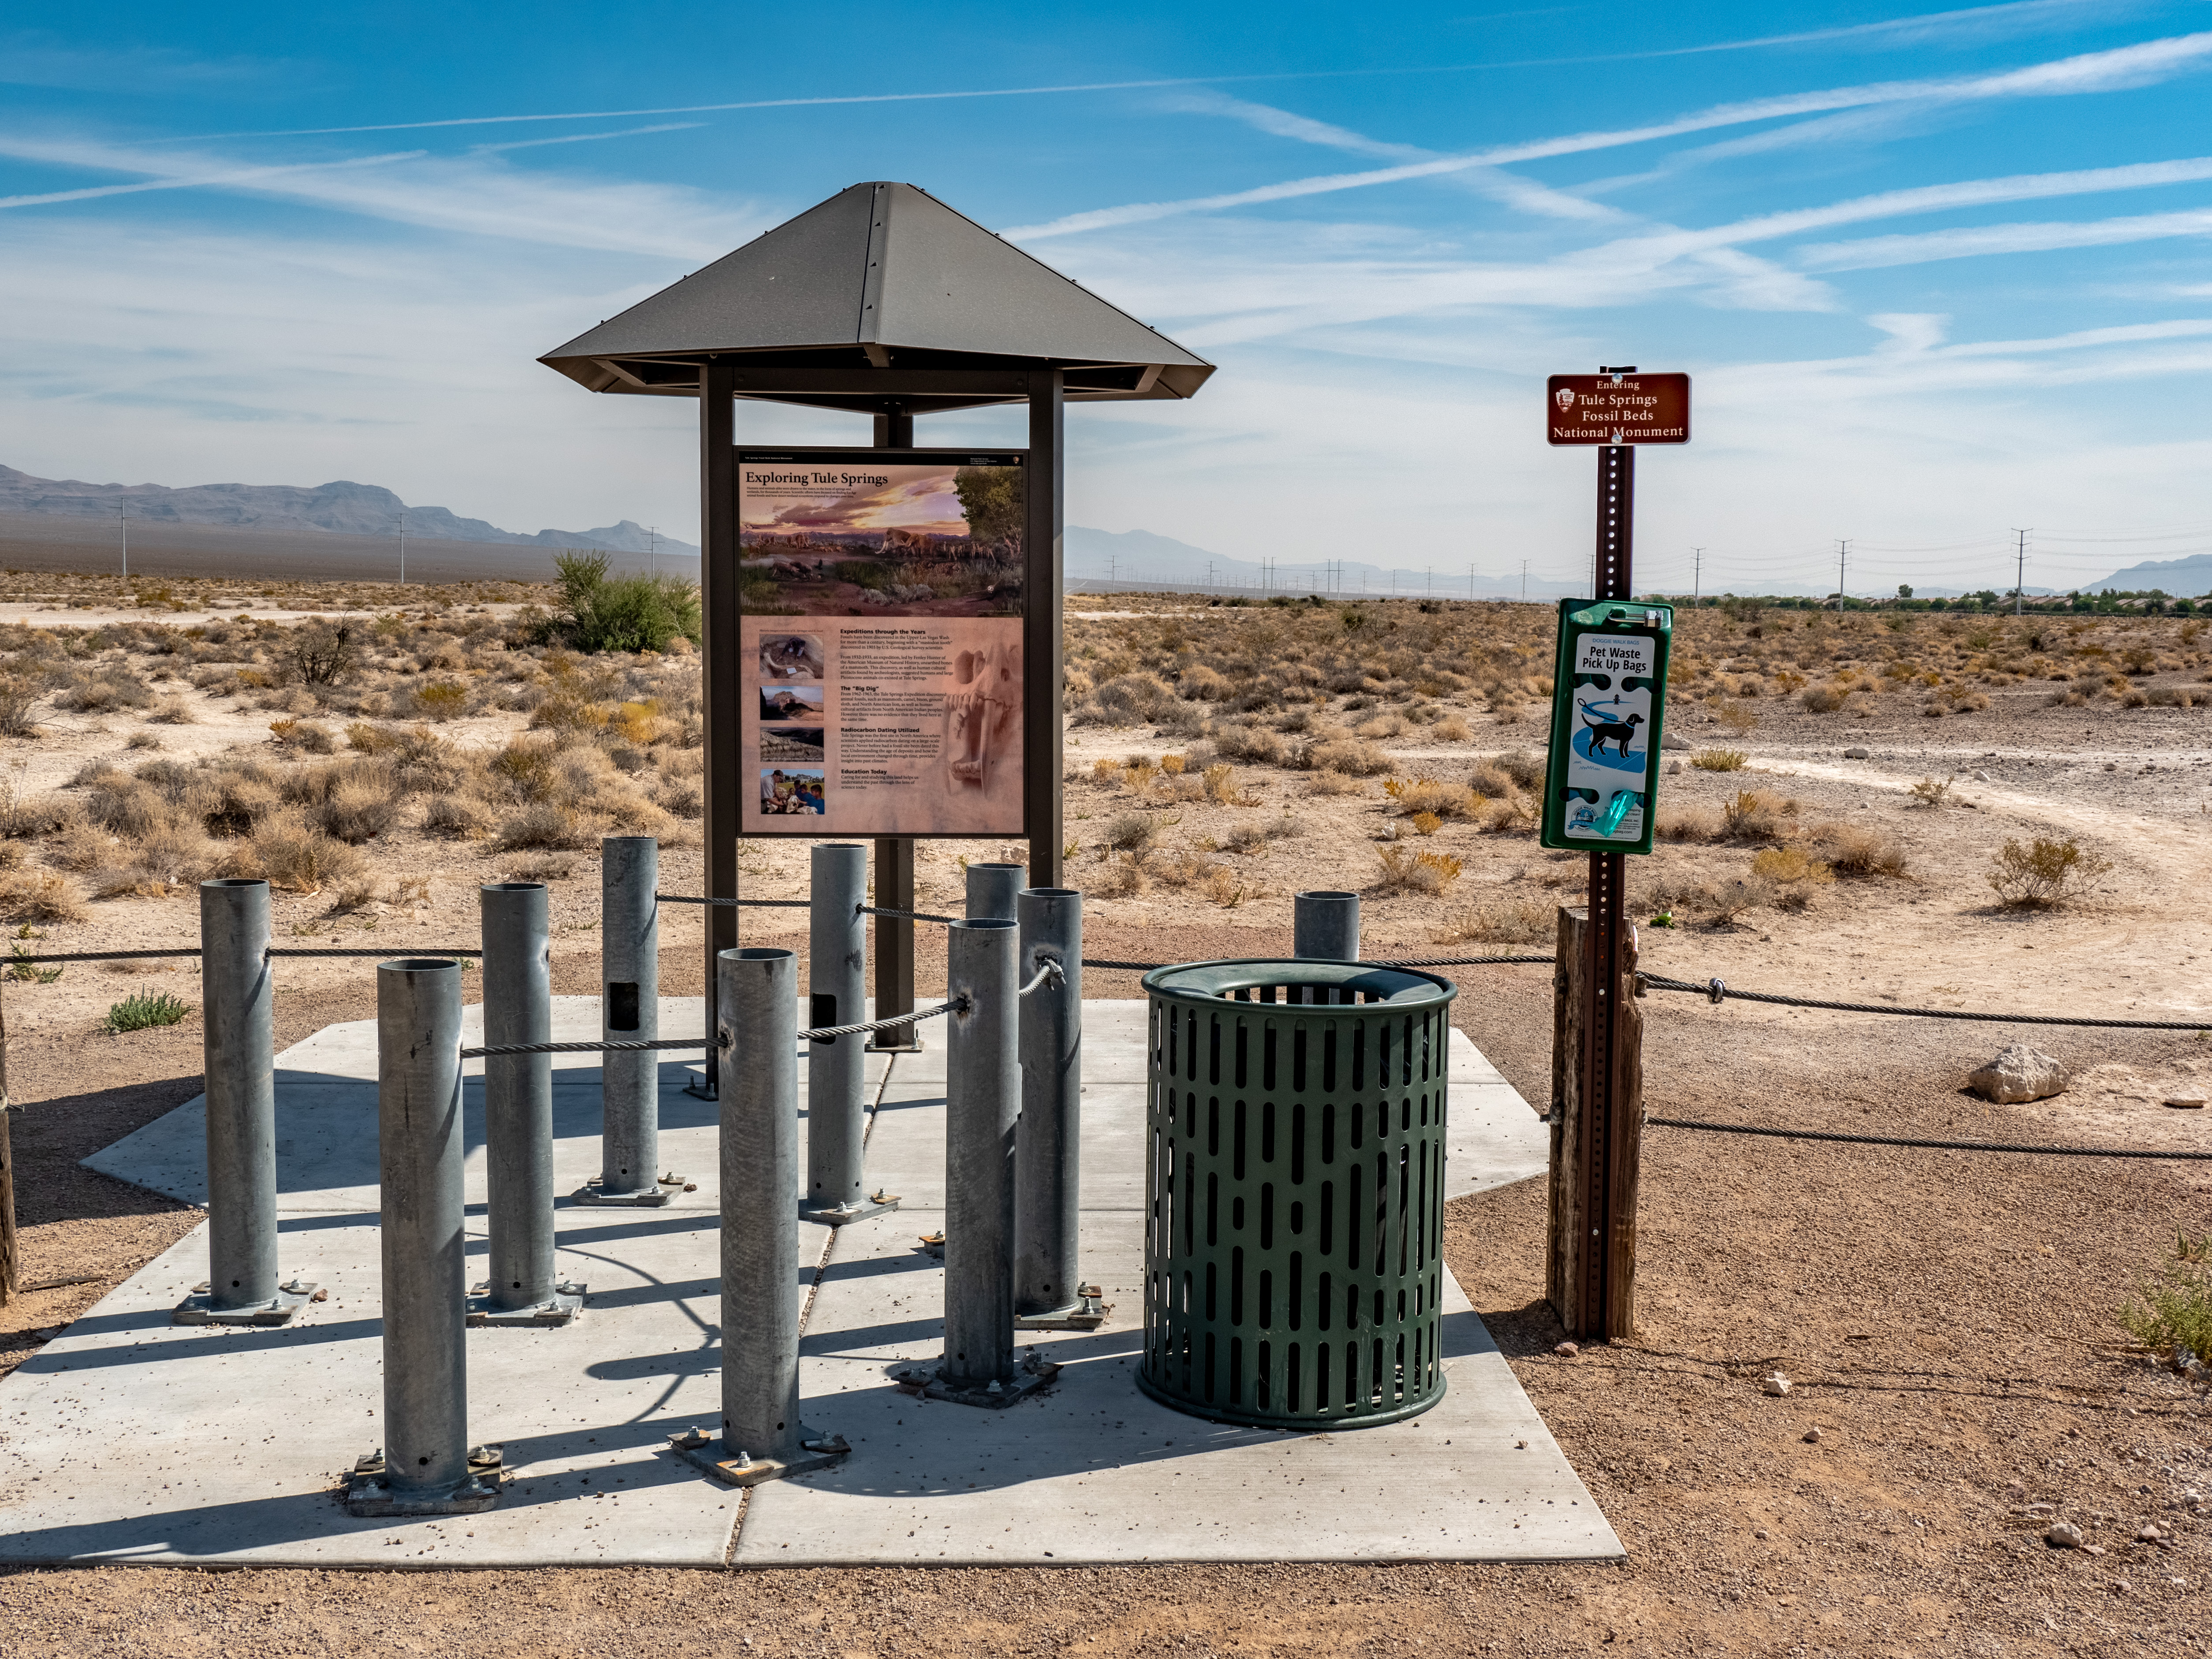 A sign with trail information marks the trailhead of the Aliante Loop Temporary Trail: Tule Springs Fossil Beds National Monument’s first recreational temporary trail.